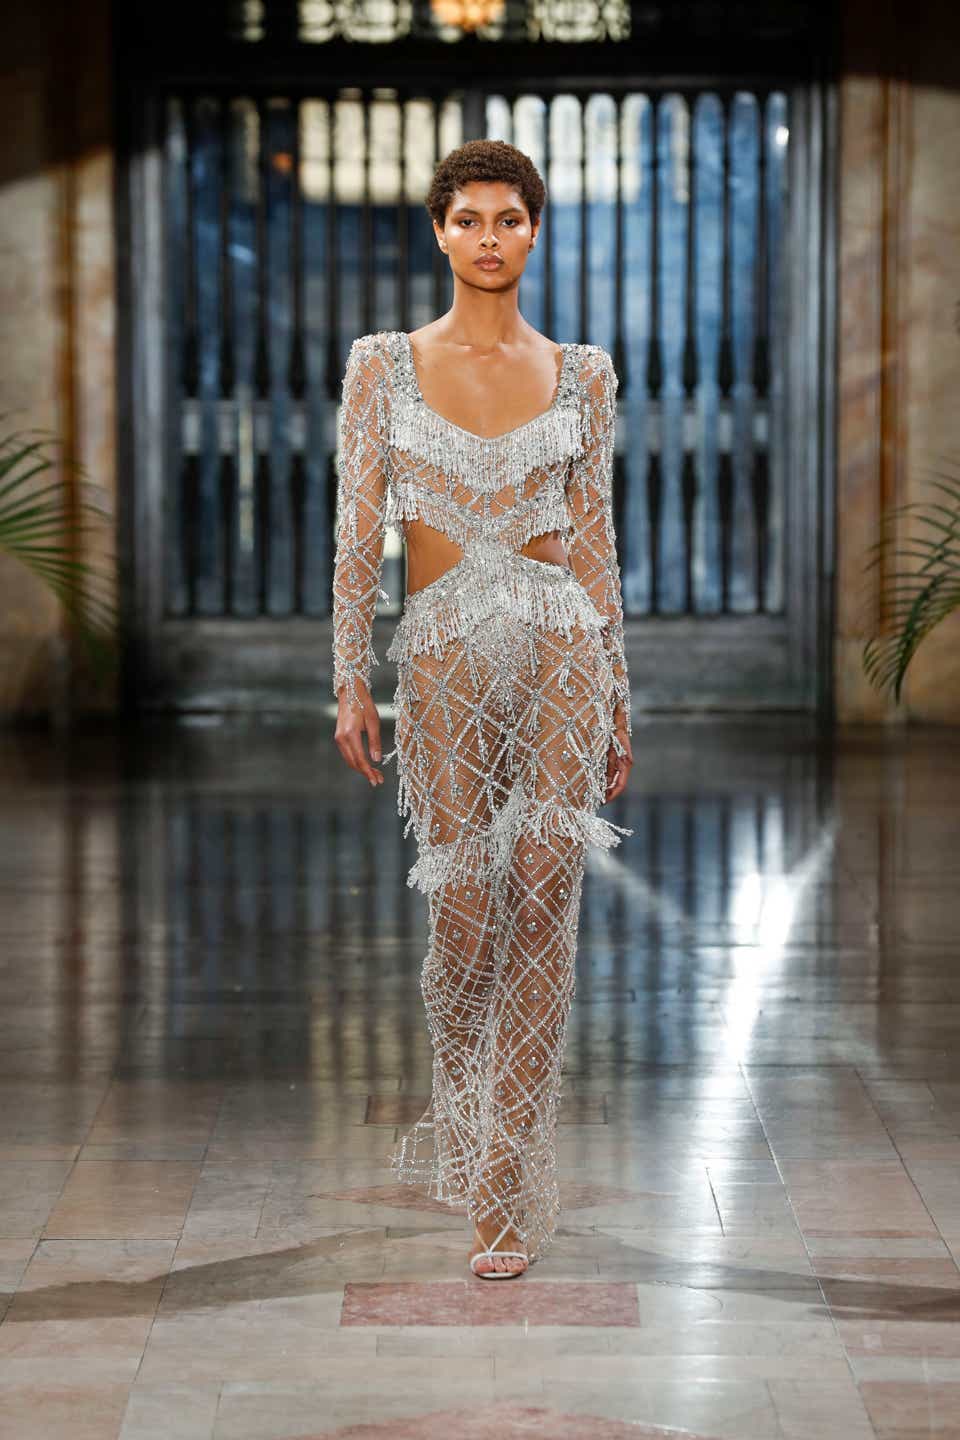 A model wearing a crystal-embellished gown on the runway of PatBo.